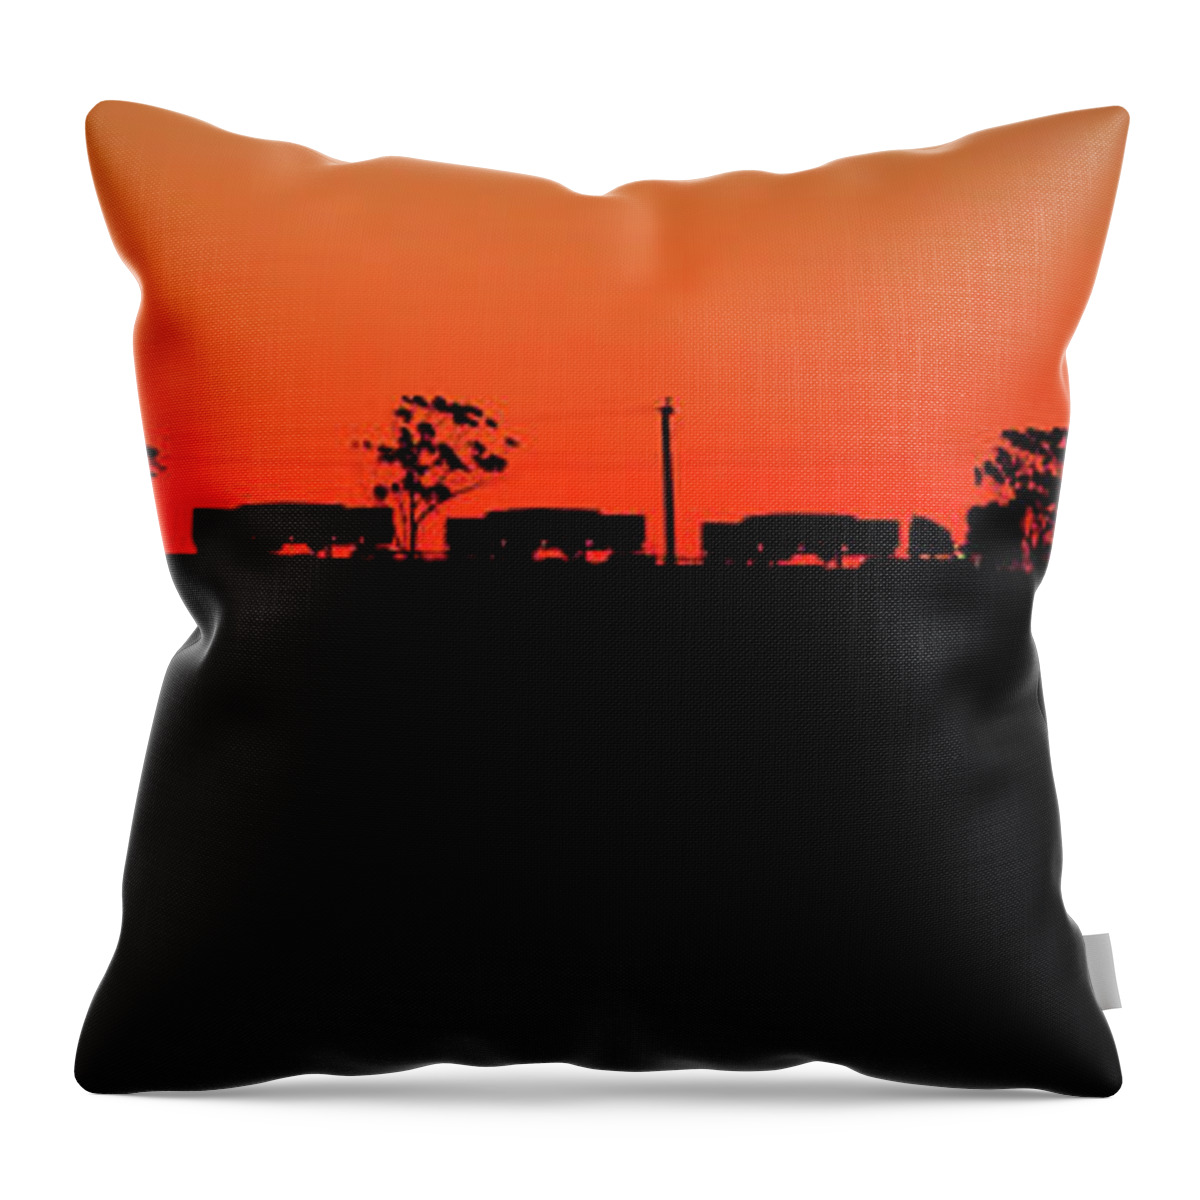 Outback South Australia Australia Sunset Roadtrain Road Train Silhouette Panorama Throw Pillow featuring the photograph Road Train Sunset Silhouette by Bill Robinson